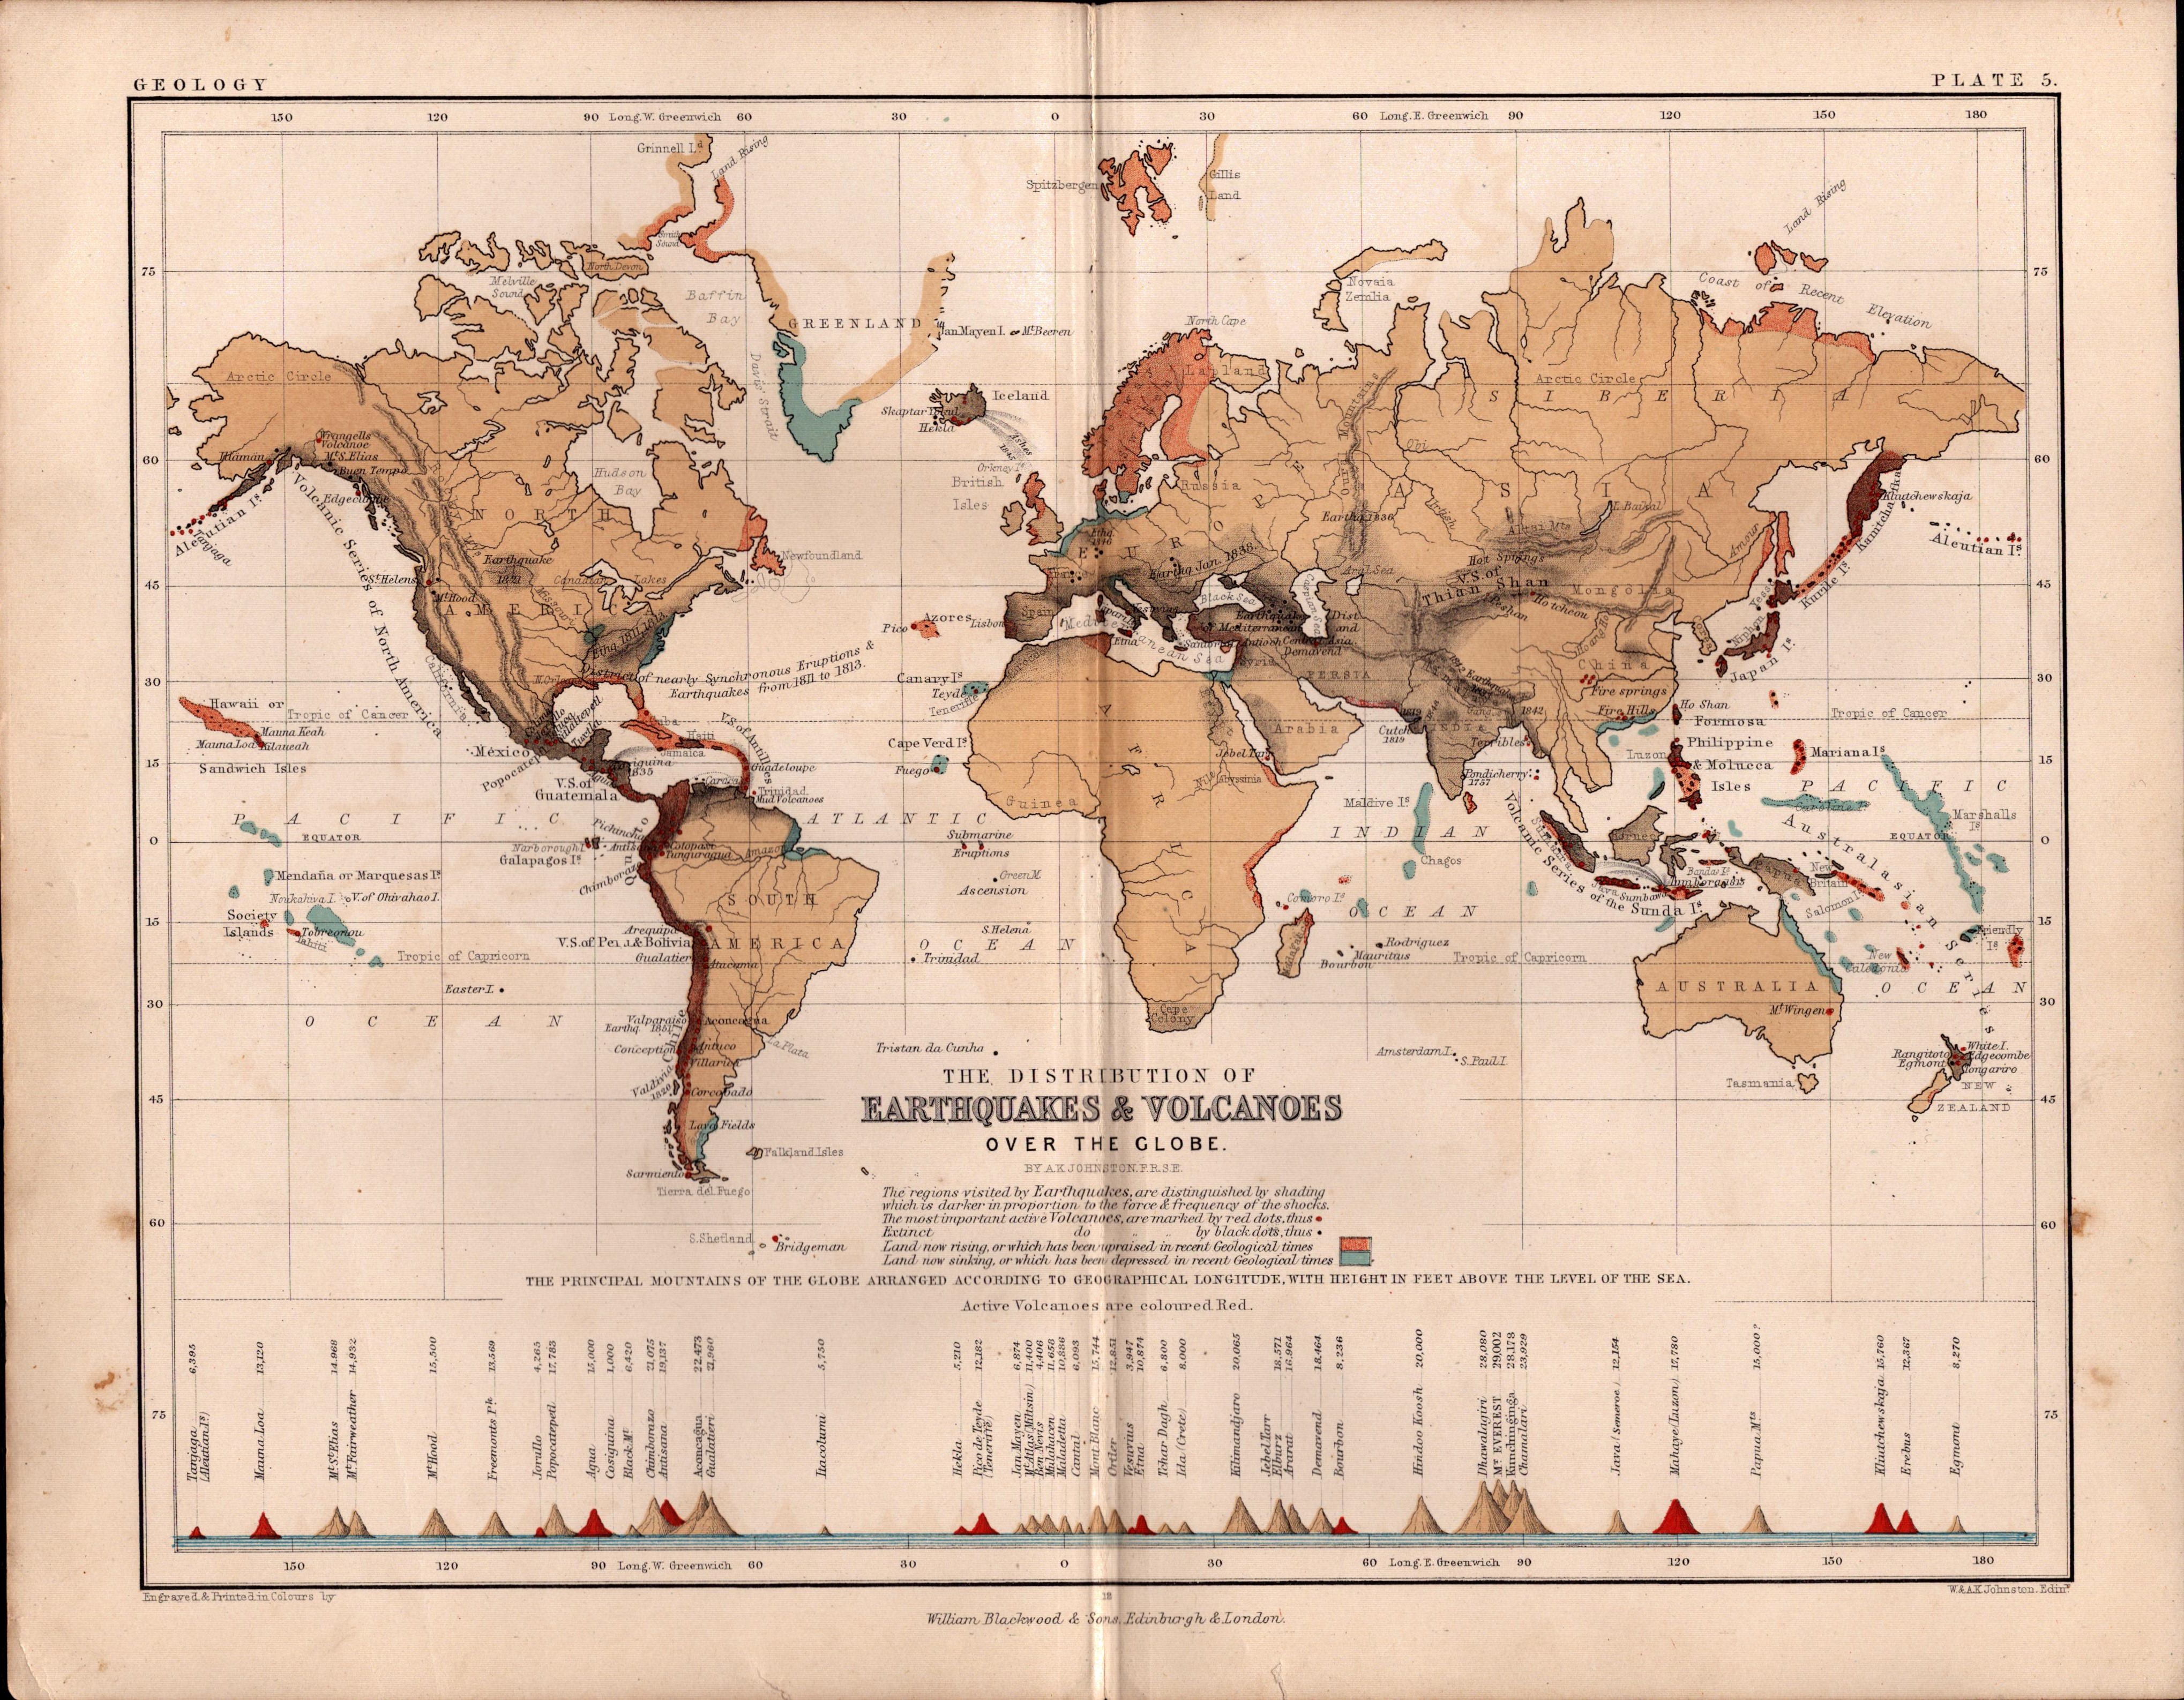 Worlds Earthquakes & Volcanoes 1871 WK Johnston Antique Map.